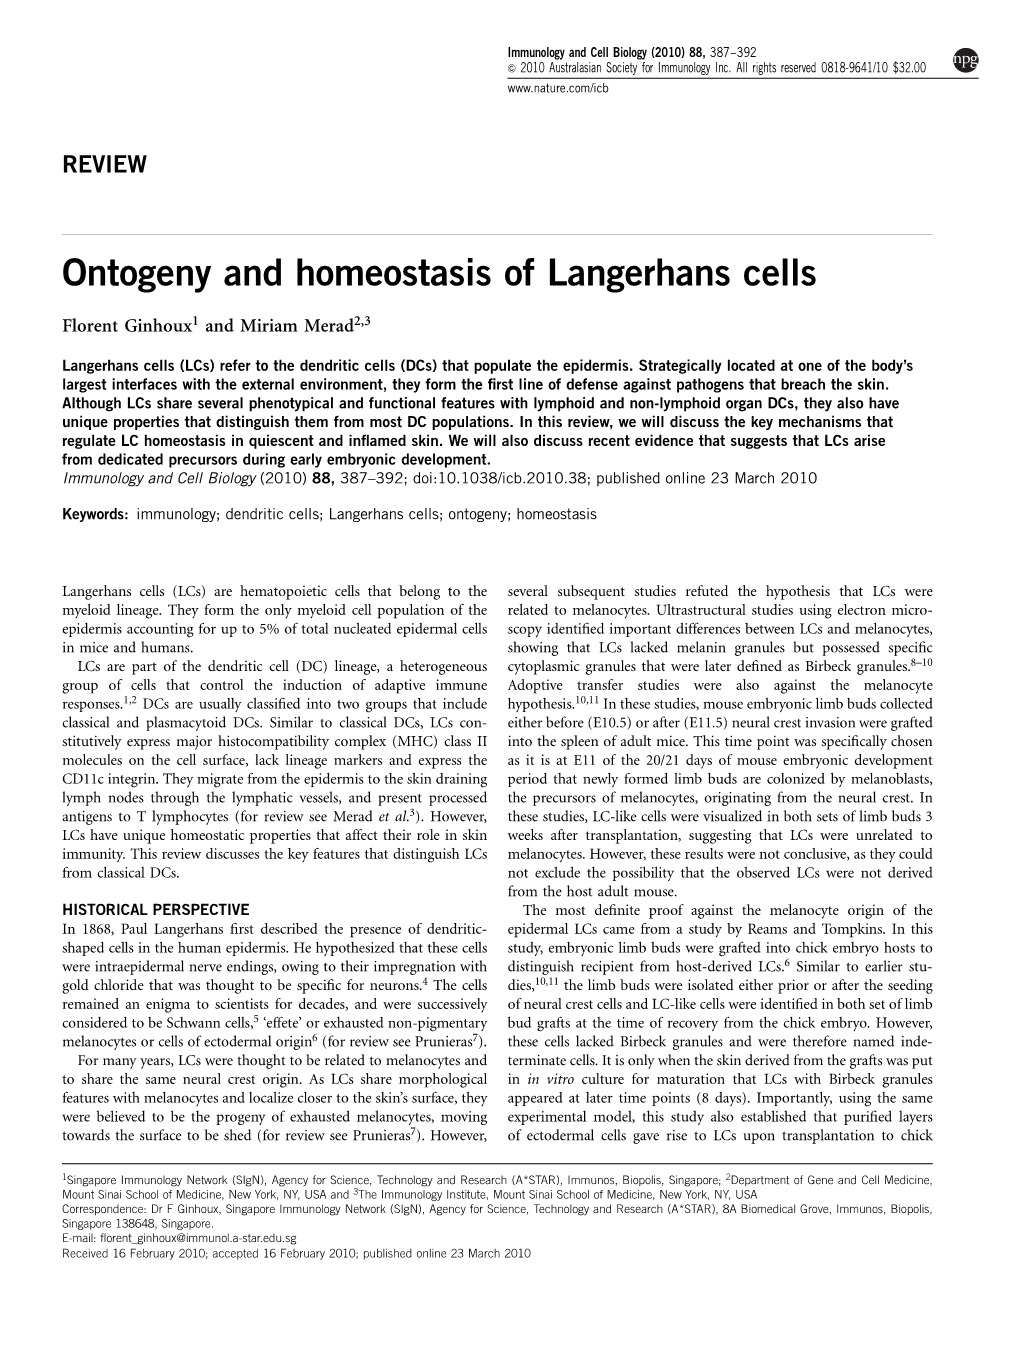 Ontogeny and Homeostasis of Langerhans Cells